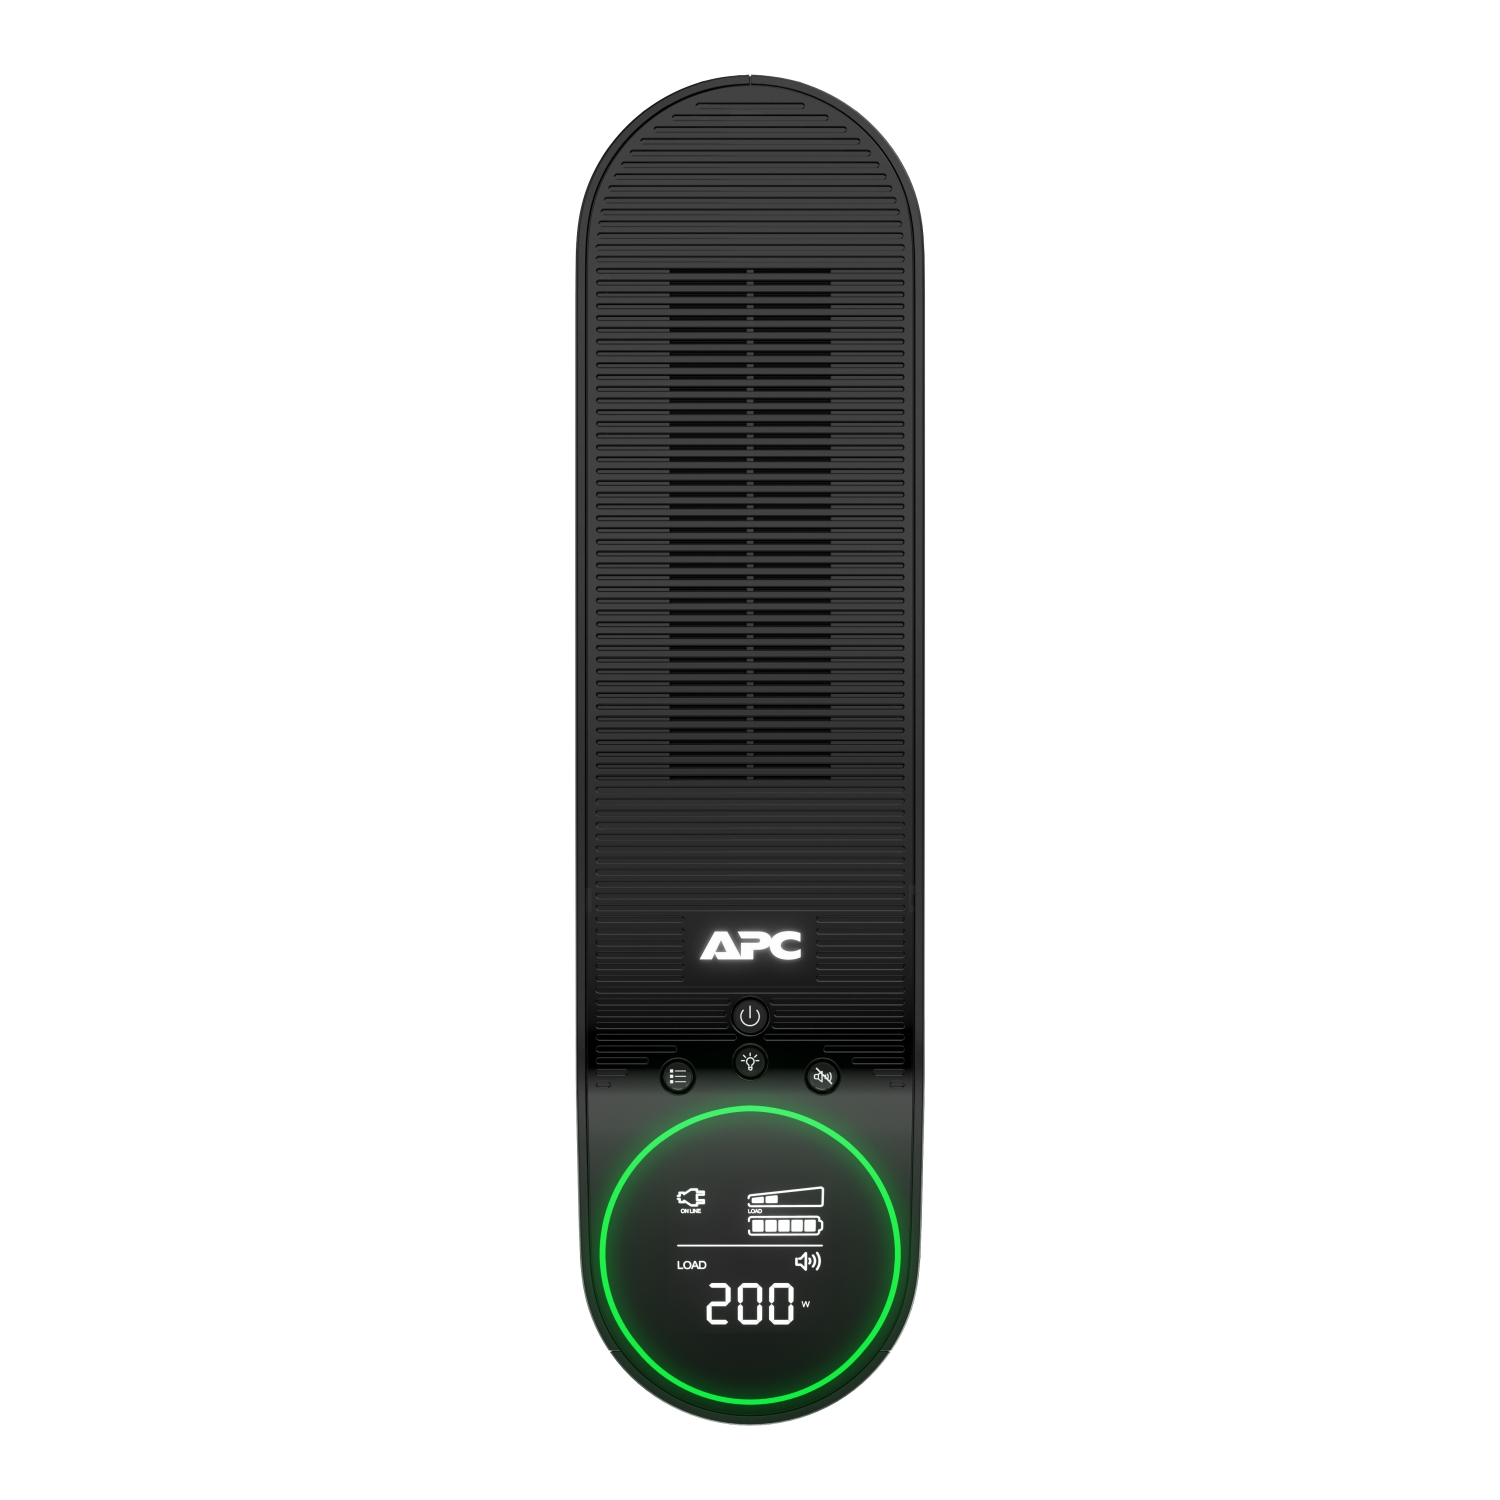 APC Gaming UPS, 1500VA Sine Wave UPS Battery Backup with AVR and (3) USB  Charger Ports, BGM1500B, Back-UPS Pro Uninterruptible Power Supply, Midnight